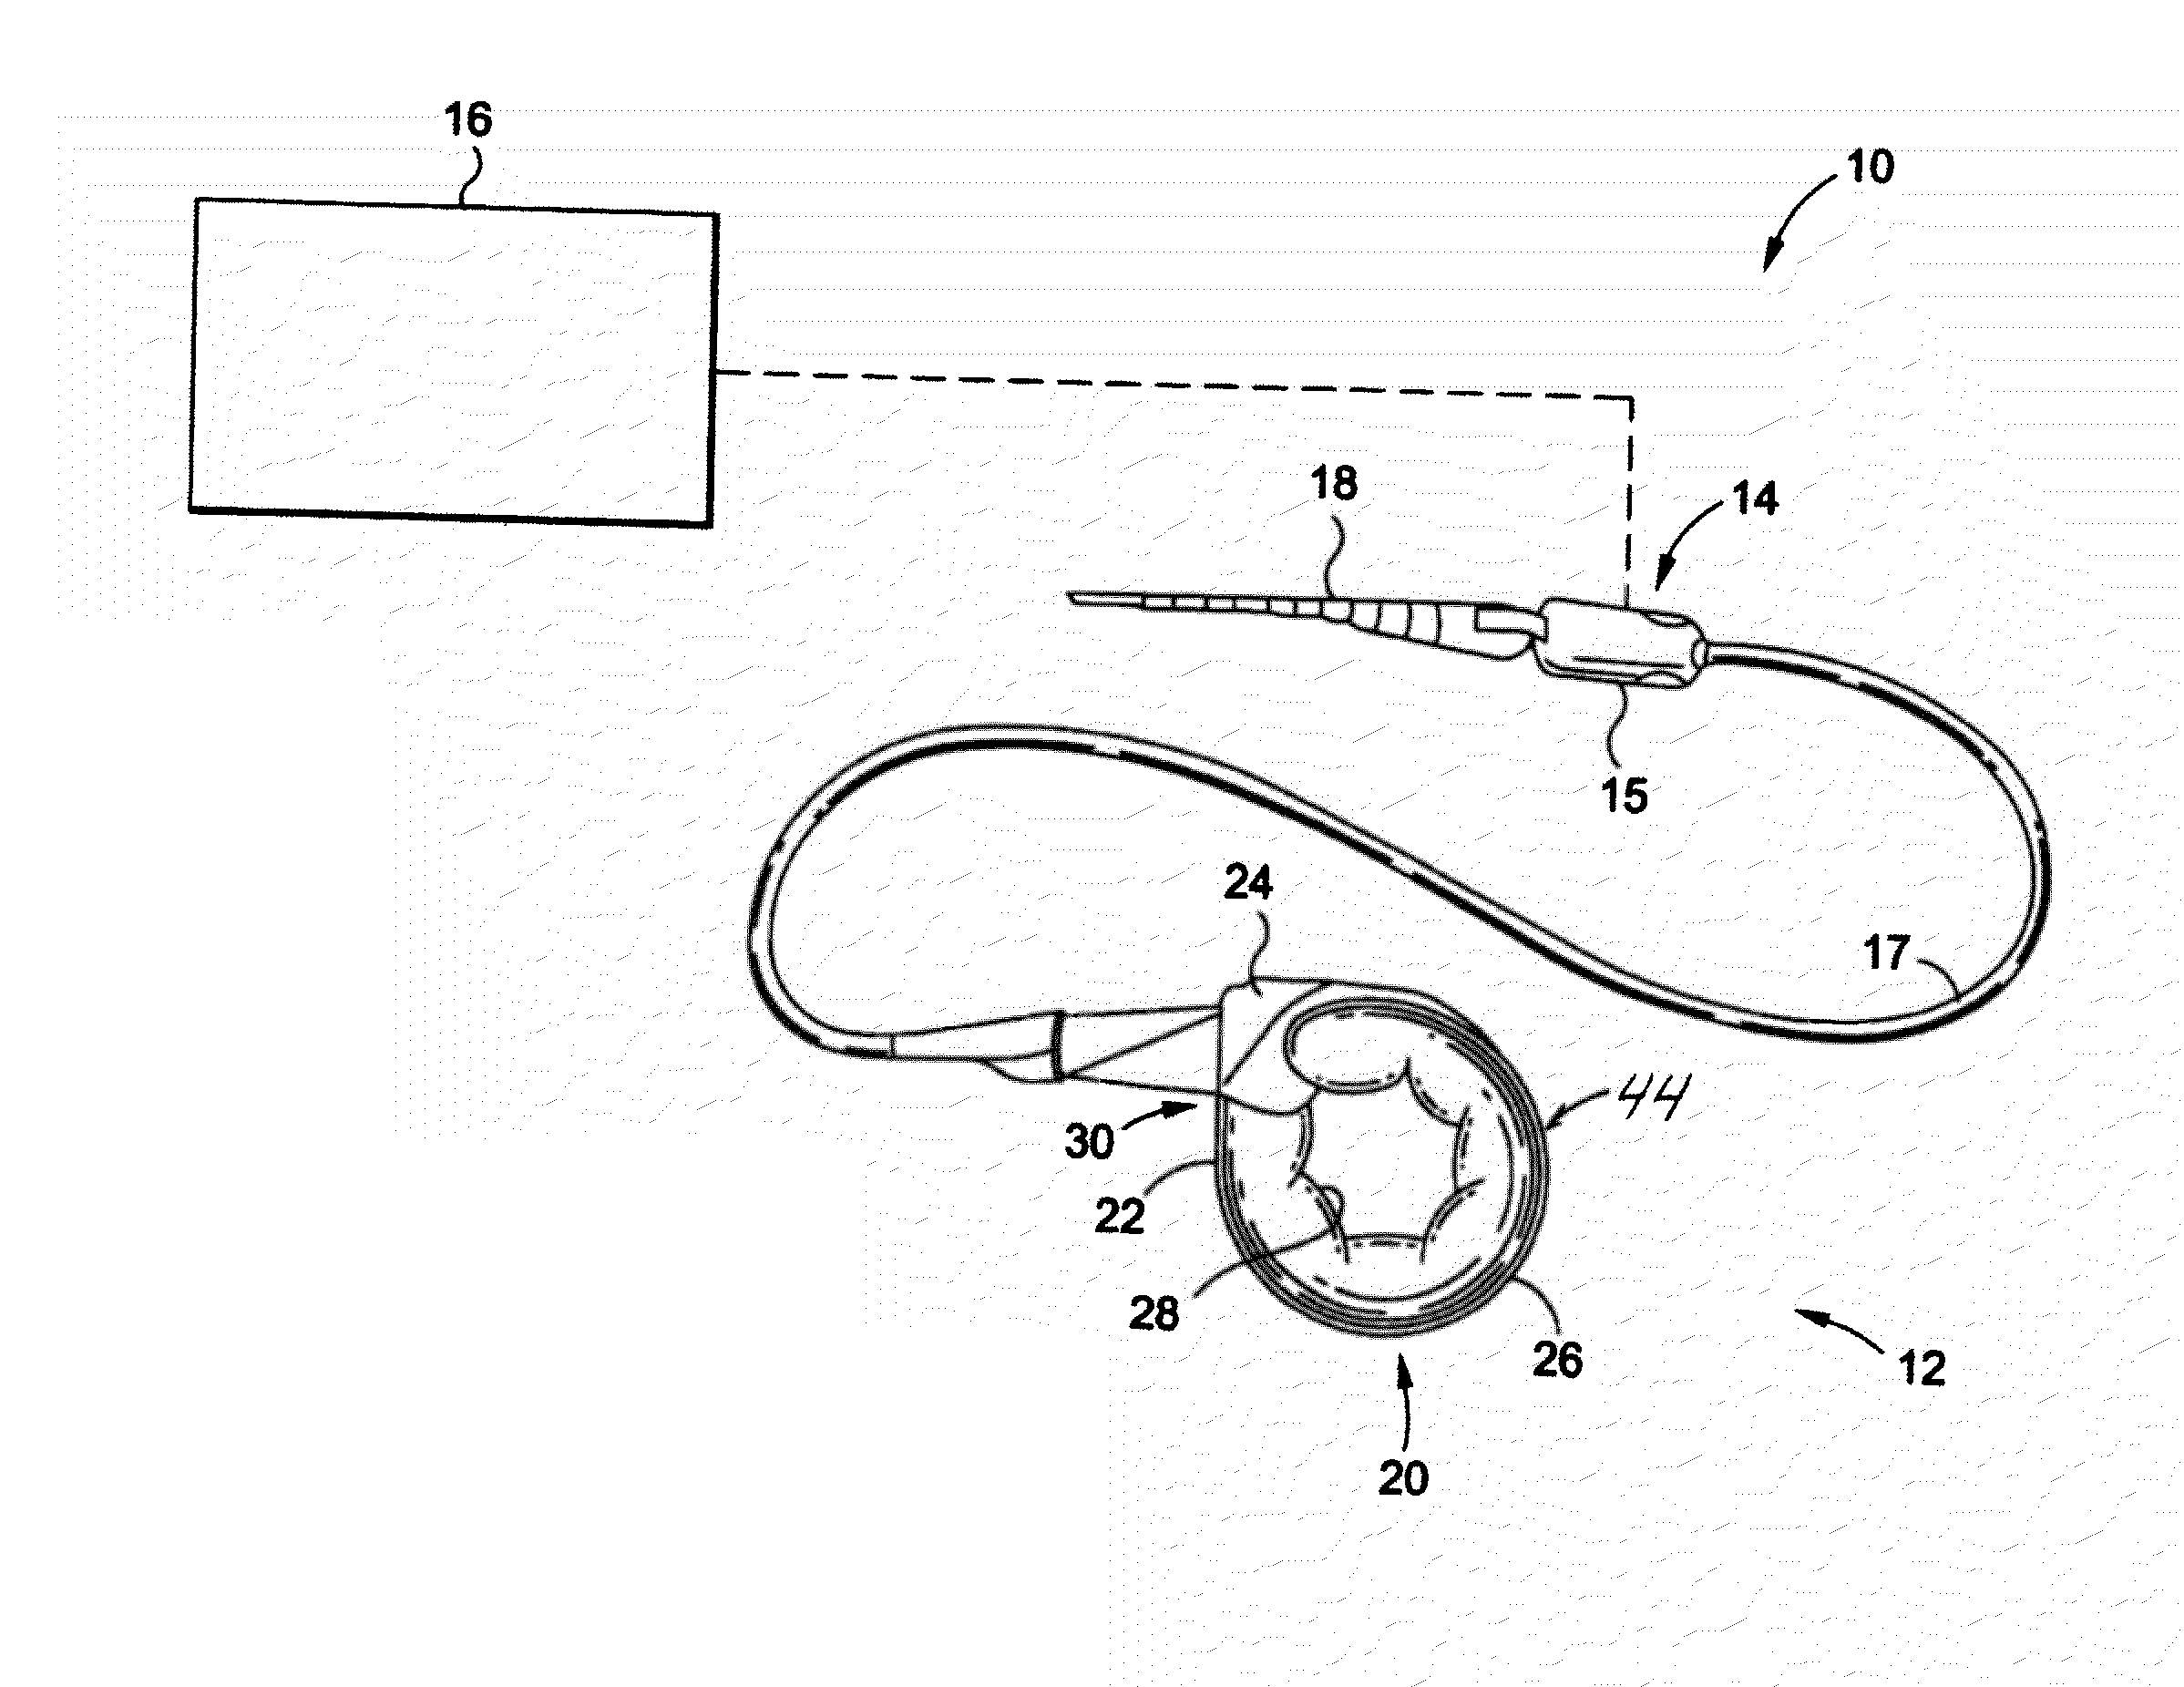 Mechanical Gastric Band With Cushions